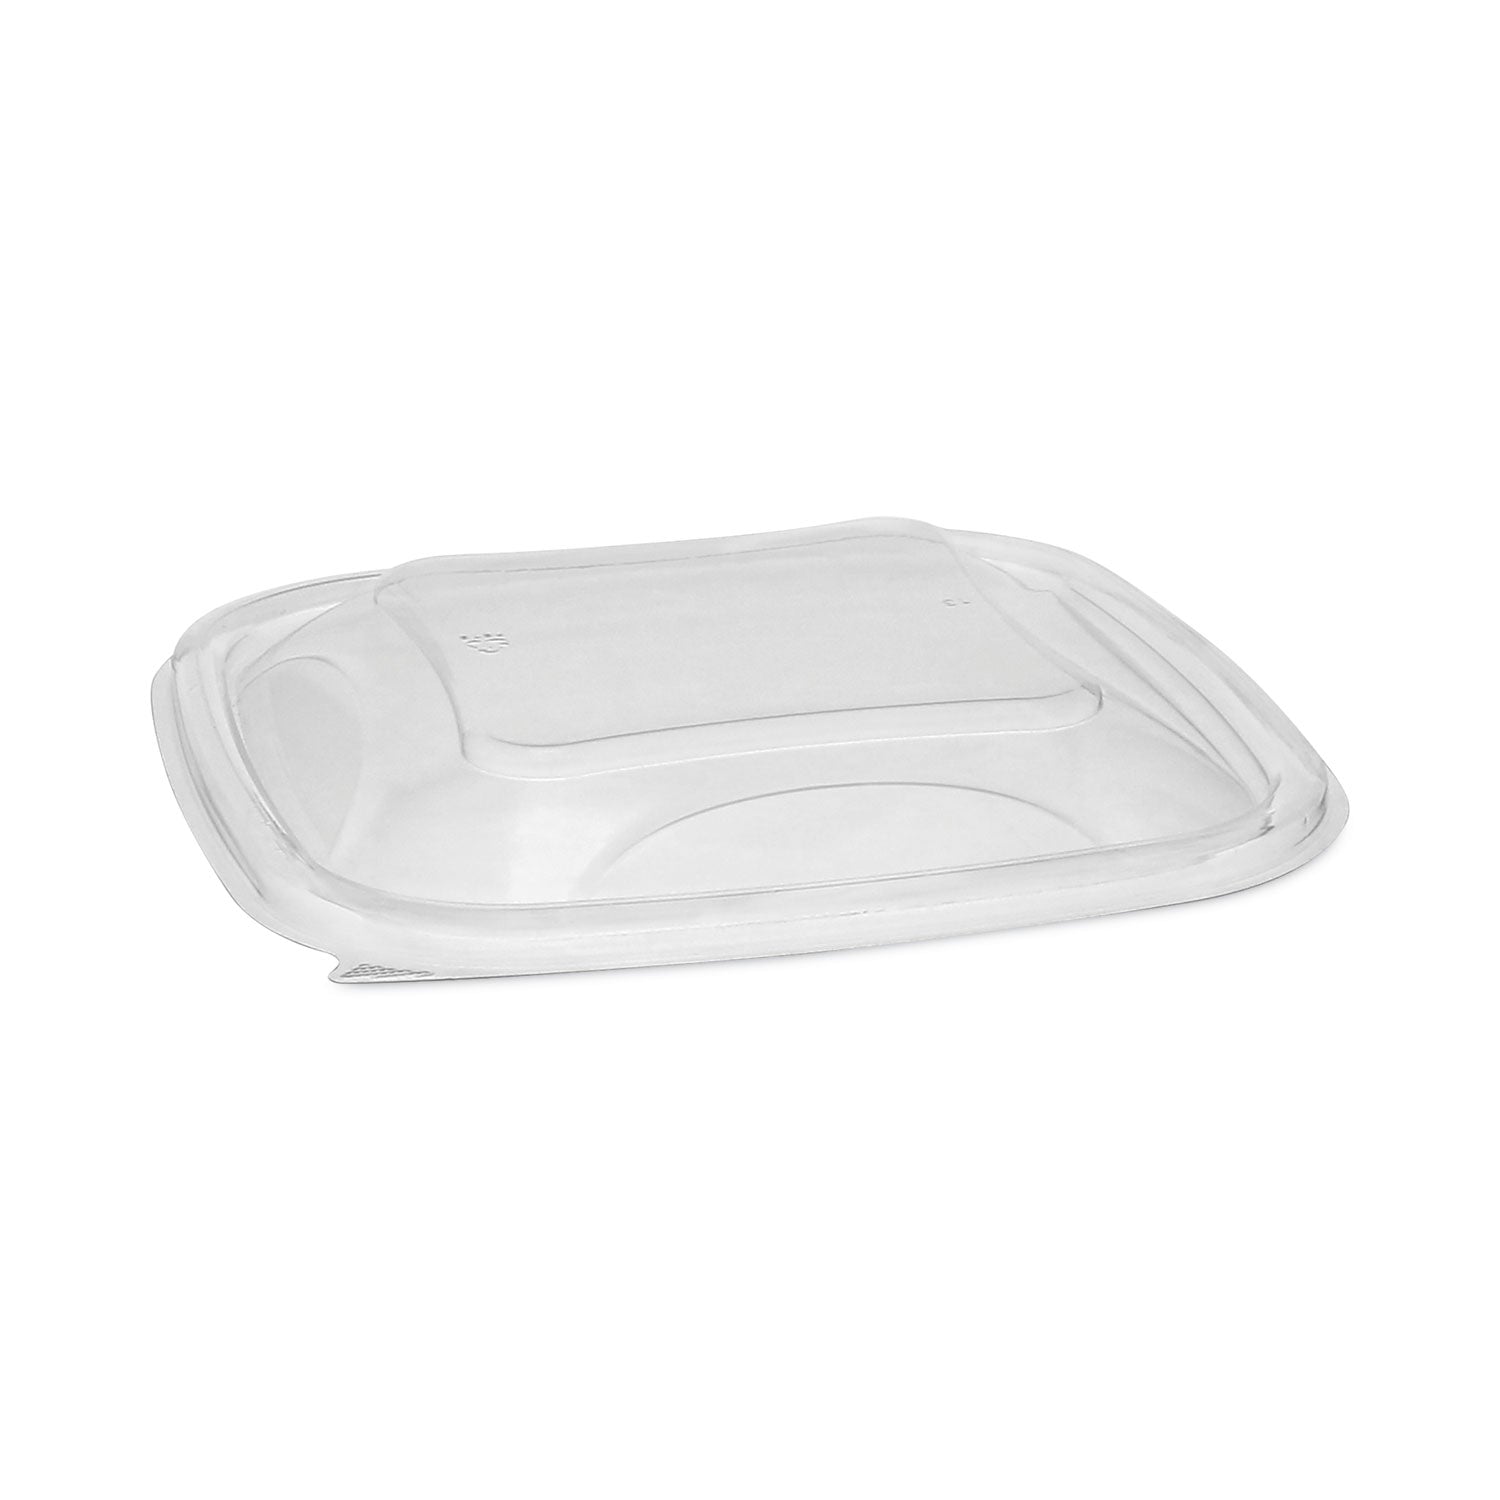 earthchoice-recycled-pet-container-lid-for-24-32-oz-container-bases-738-x-738-x-082-clear-plastic-300-carton_pctsacld07 - 1